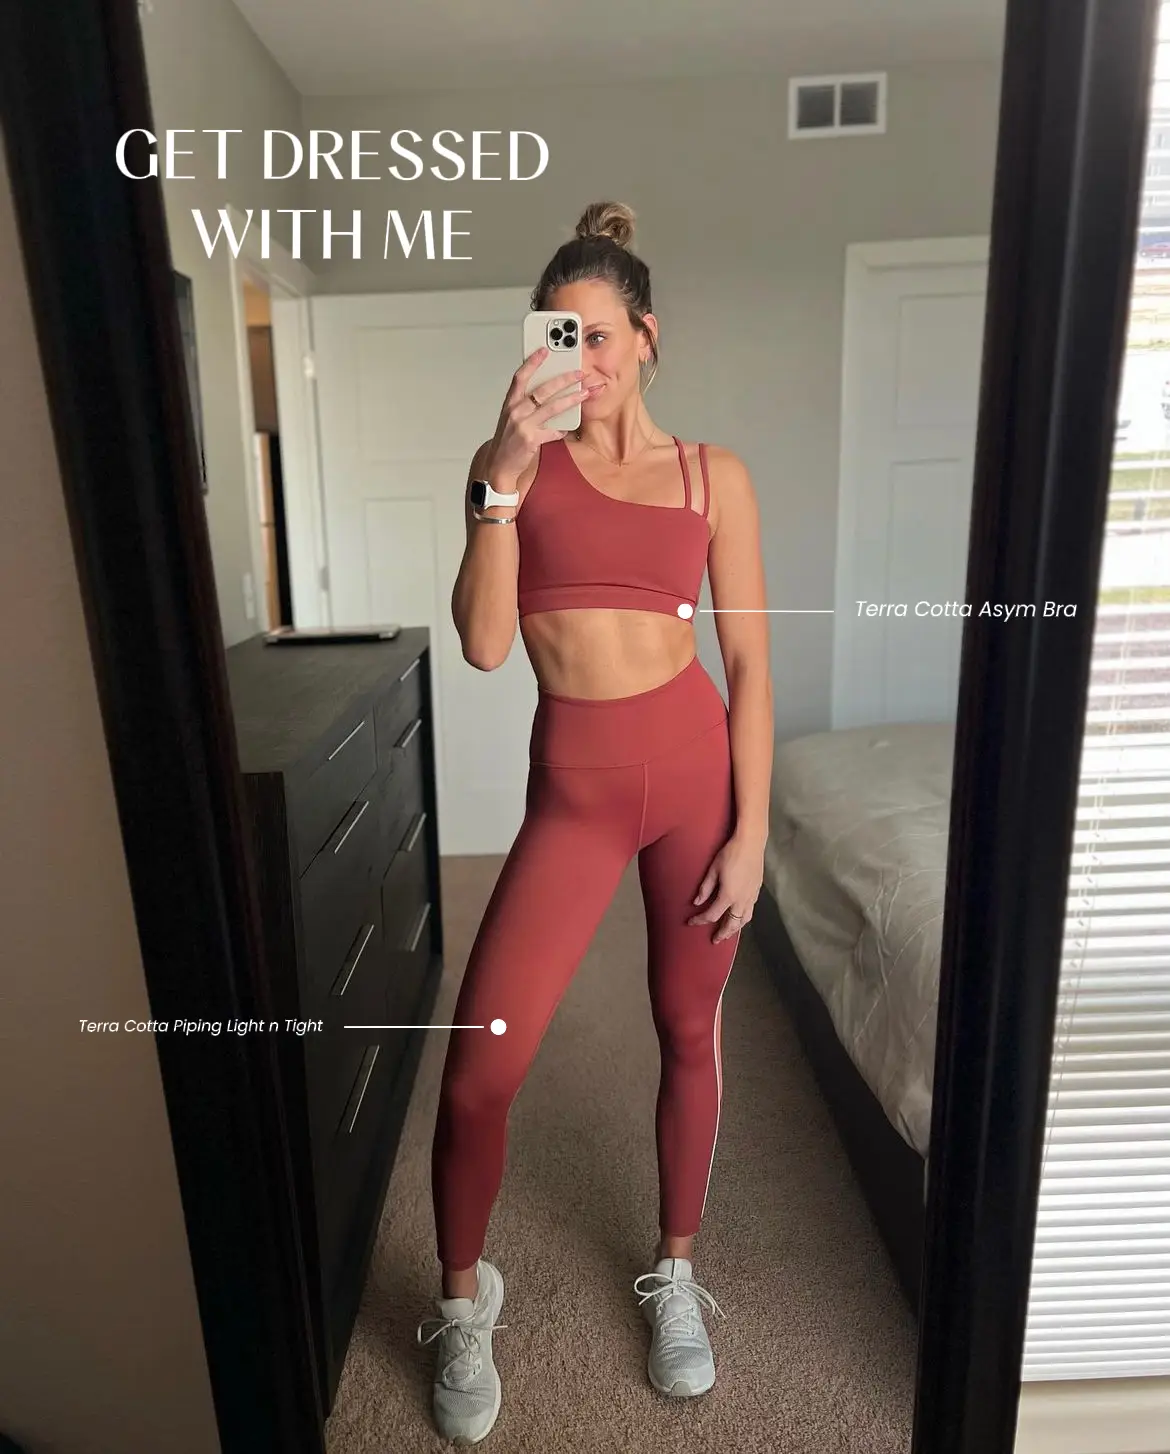 Joie Chavis Fitness Goal  Fit body goals, Fit black women, Athleisure  outfits